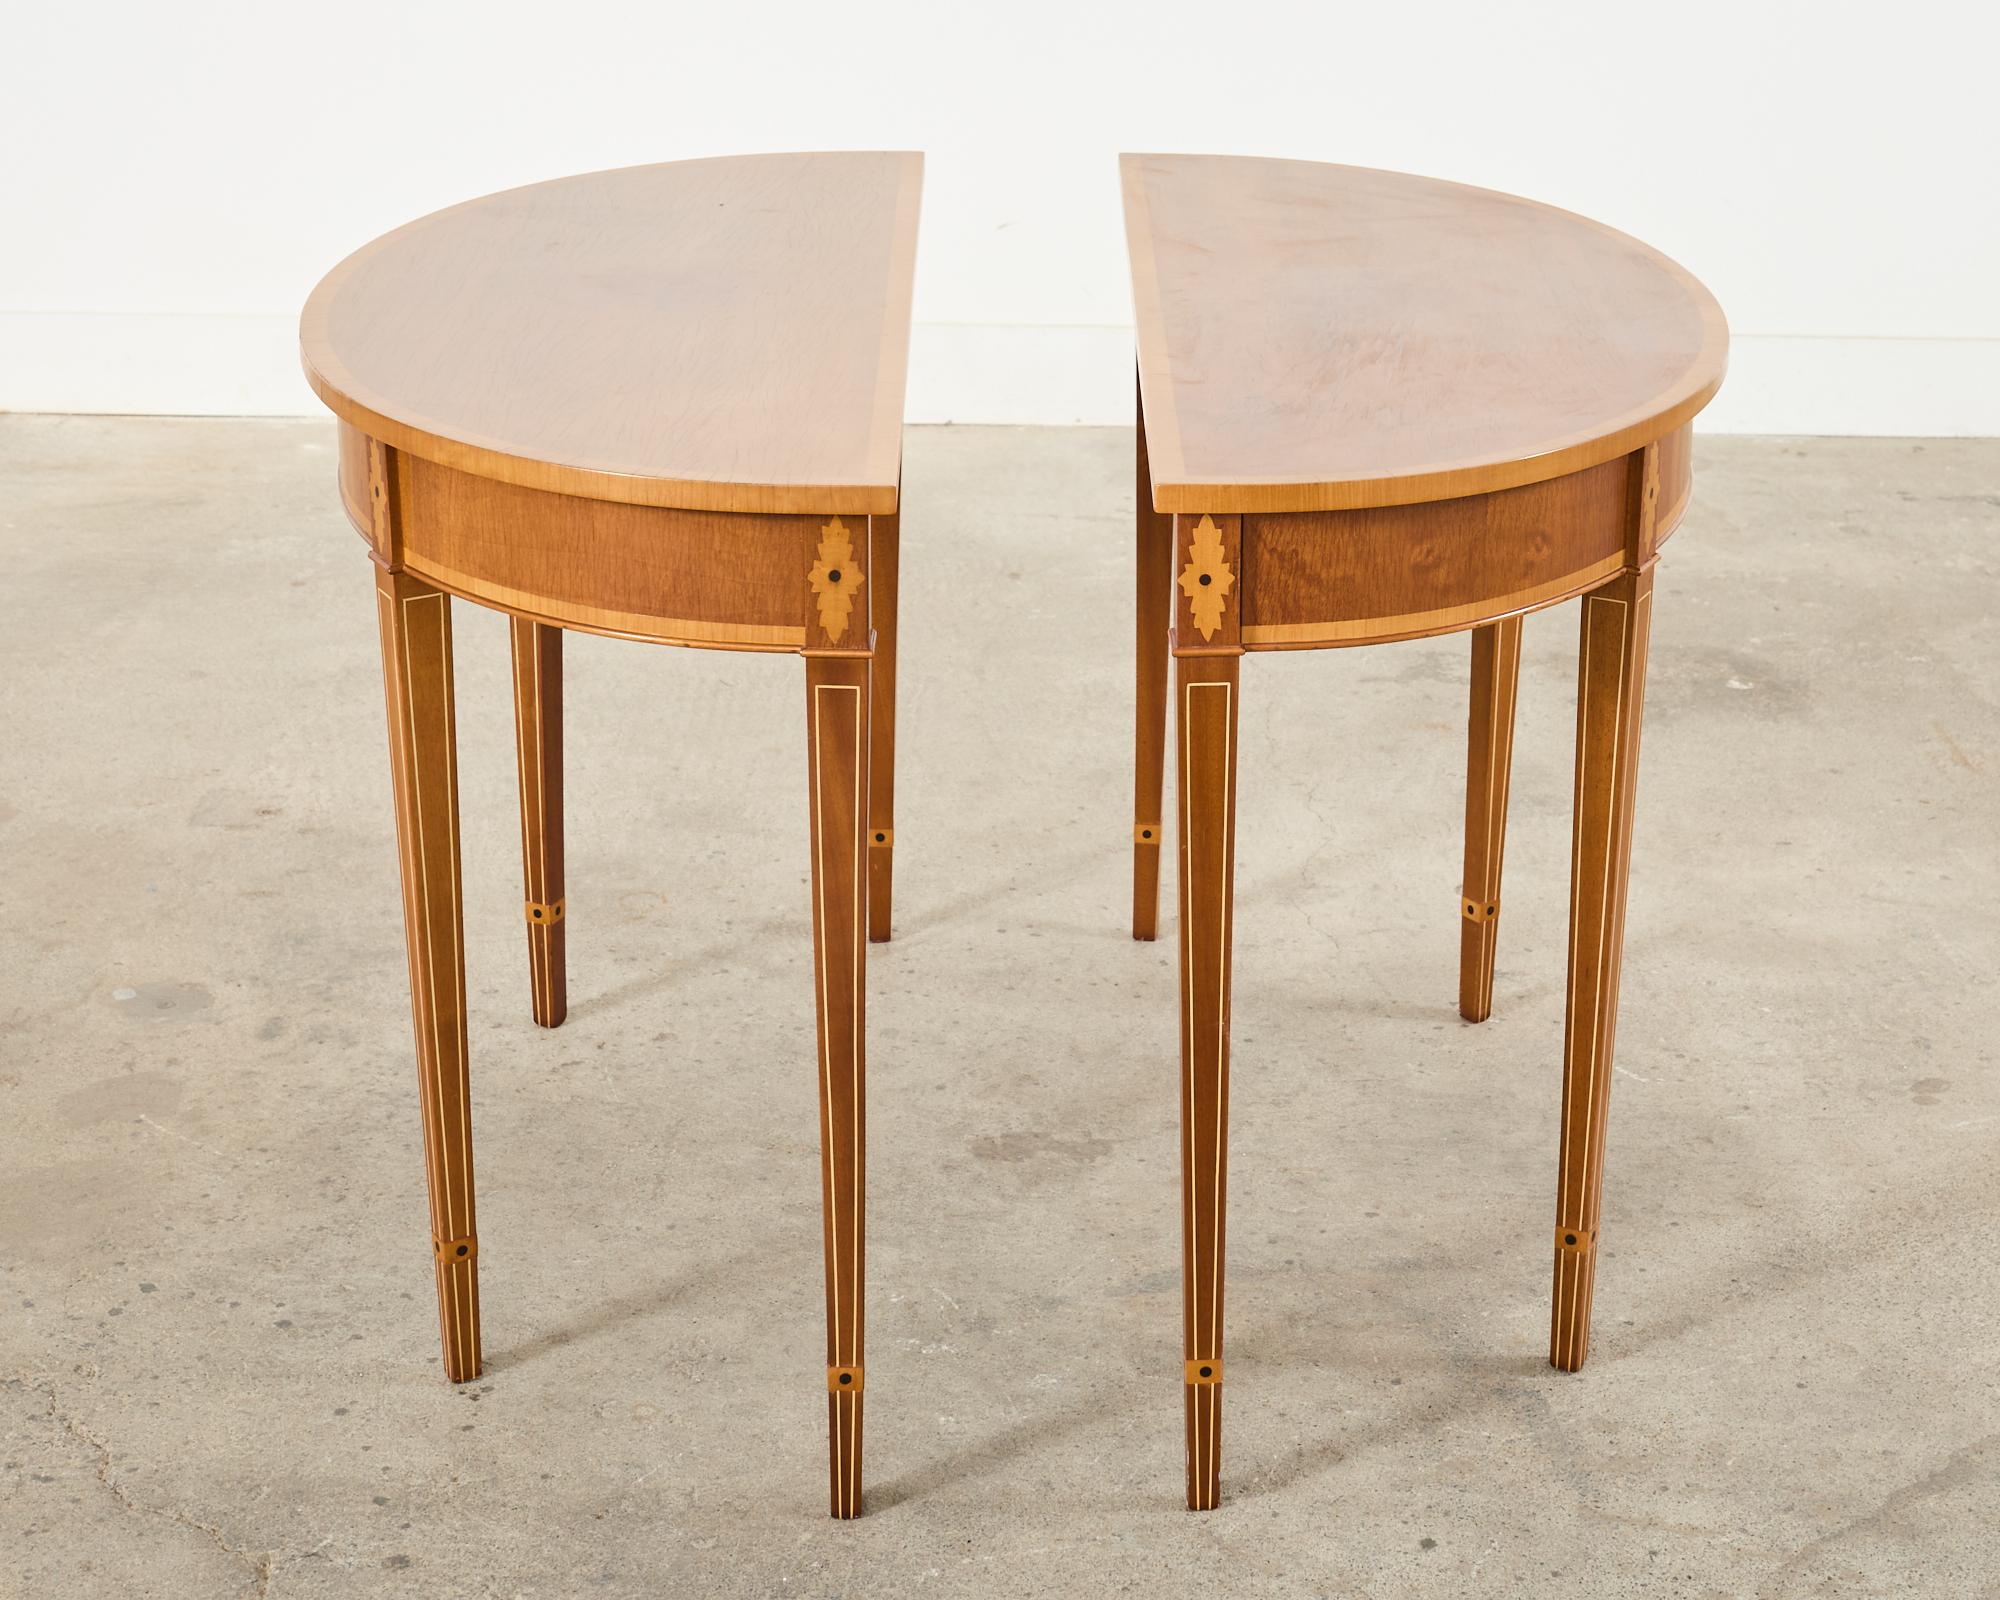 Pair of Demilune Console Tables with Marquetry Inlay For Sale 7